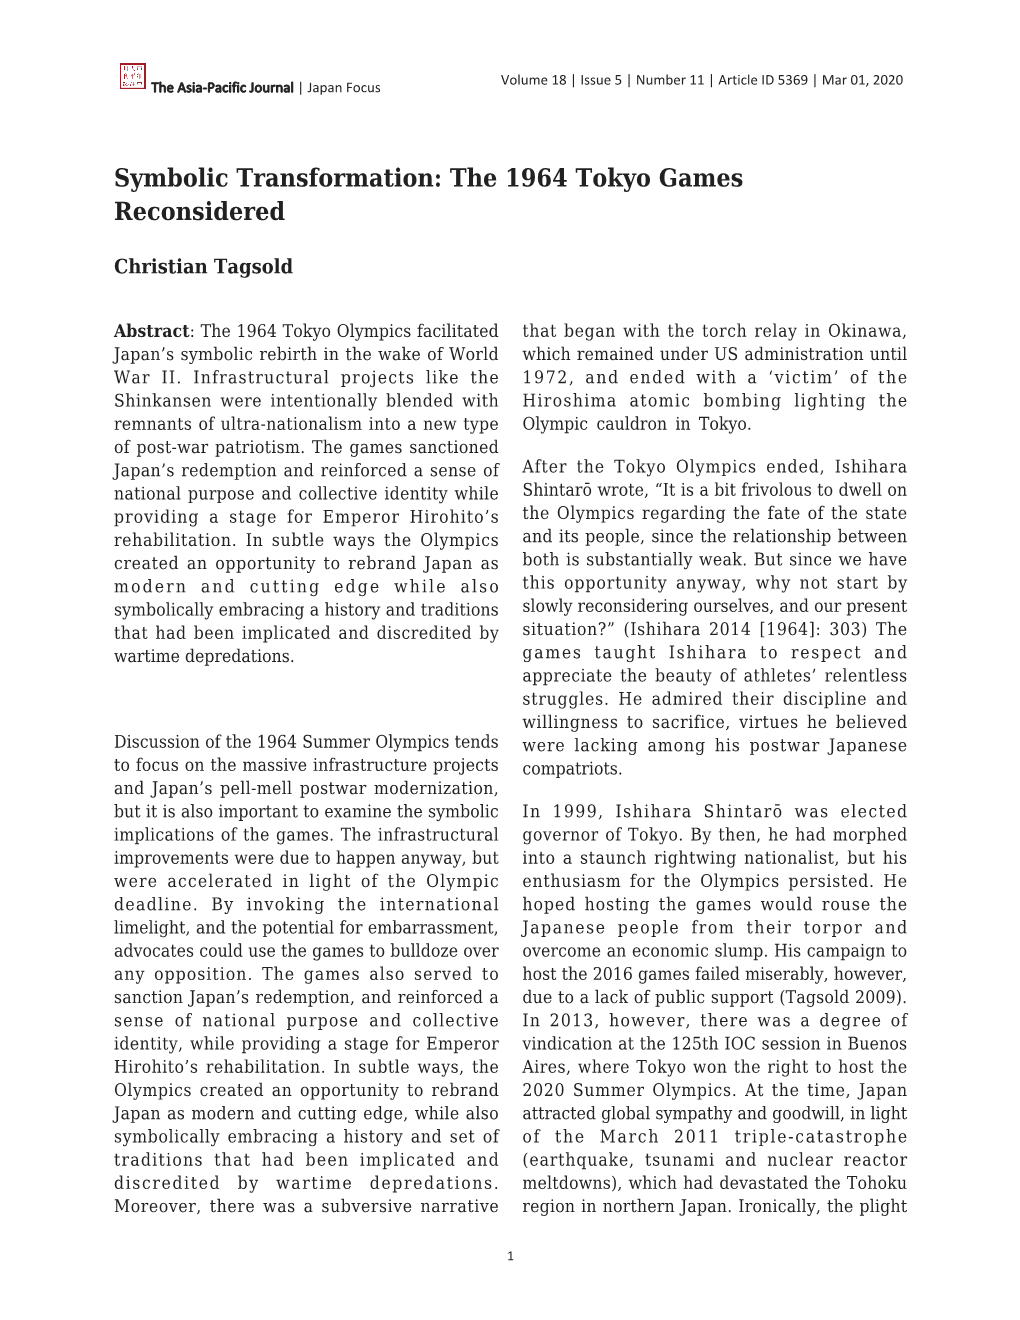 The 1964 Tokyo Games Reconsidered